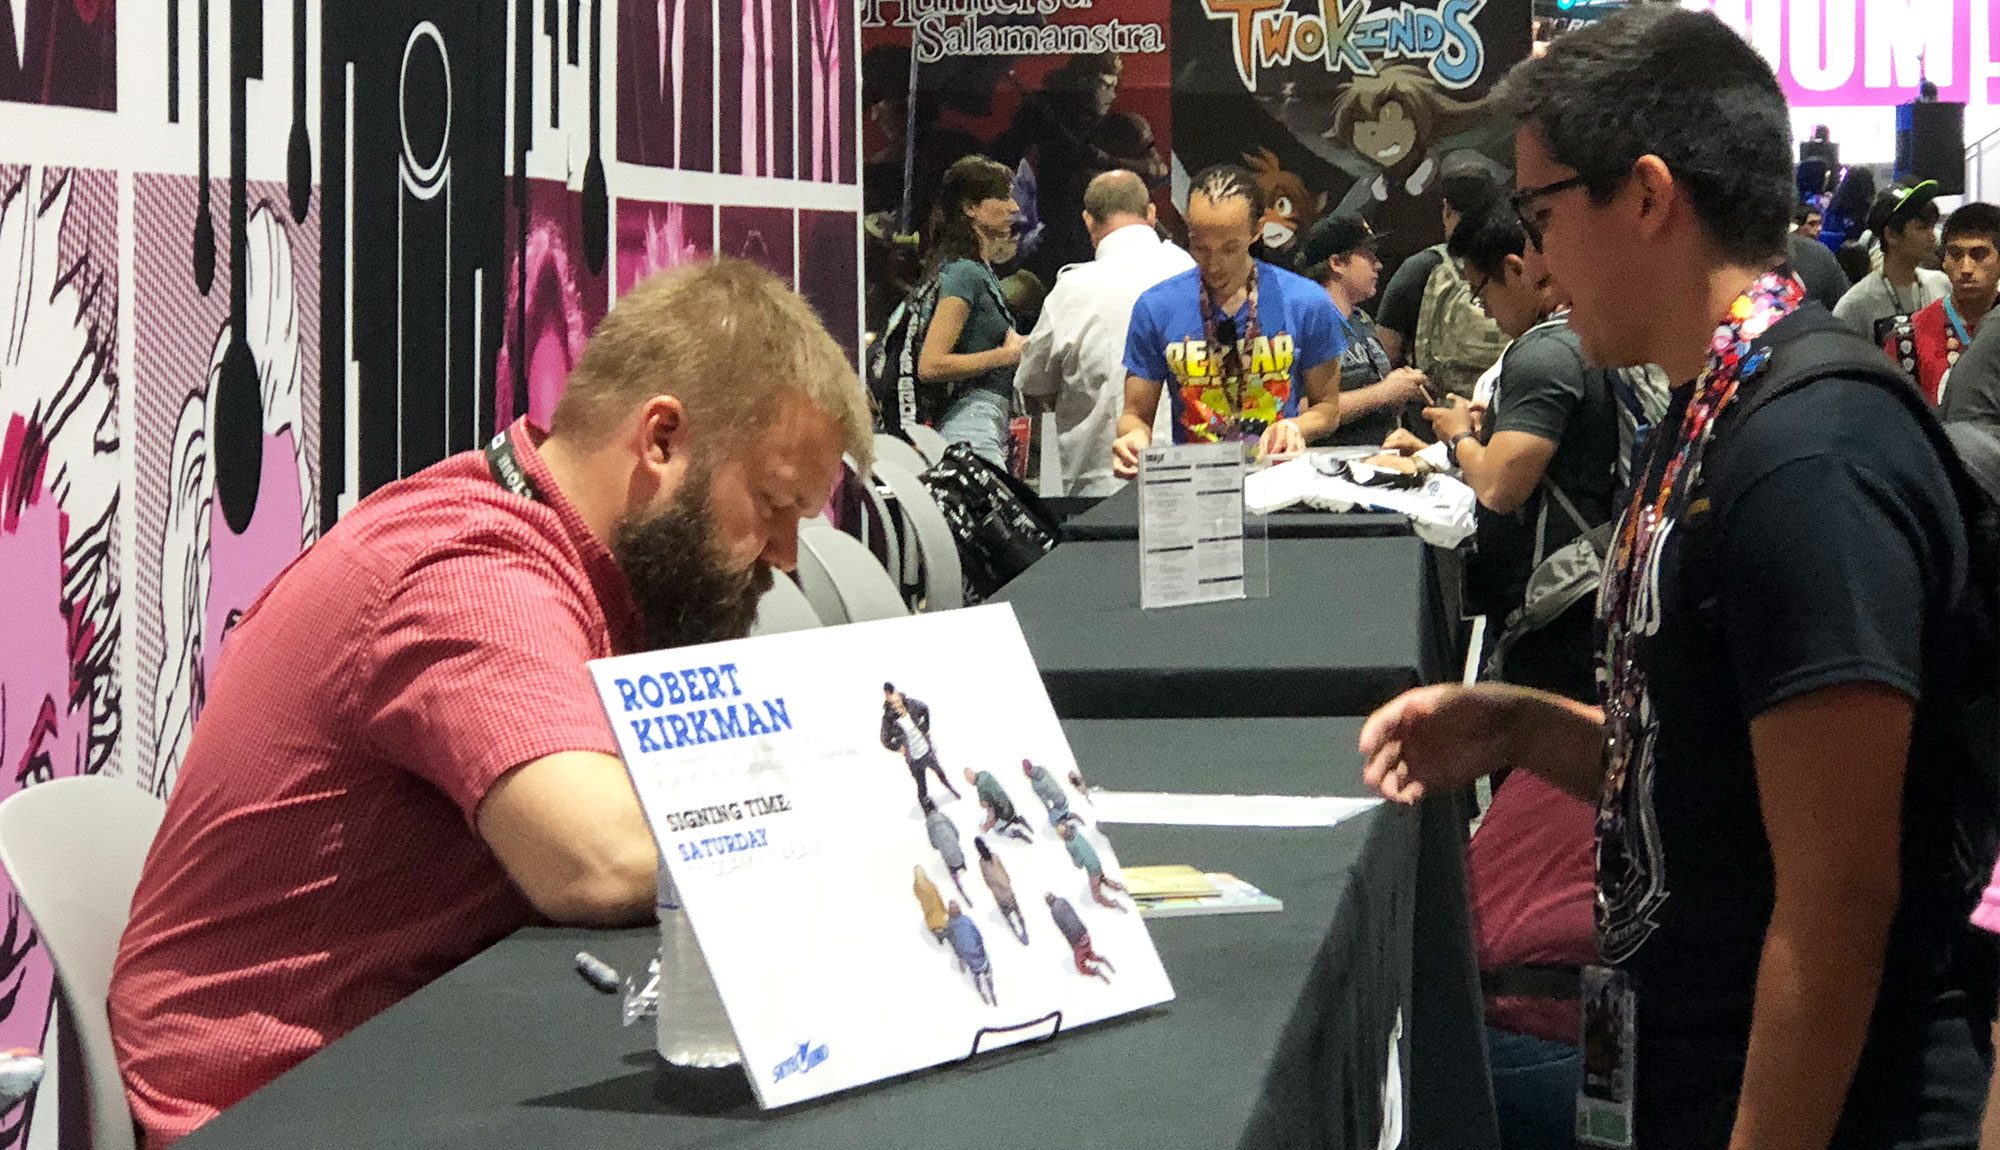 San Diego Comic Con 2019 Skybound Signing Schedule Revealed!